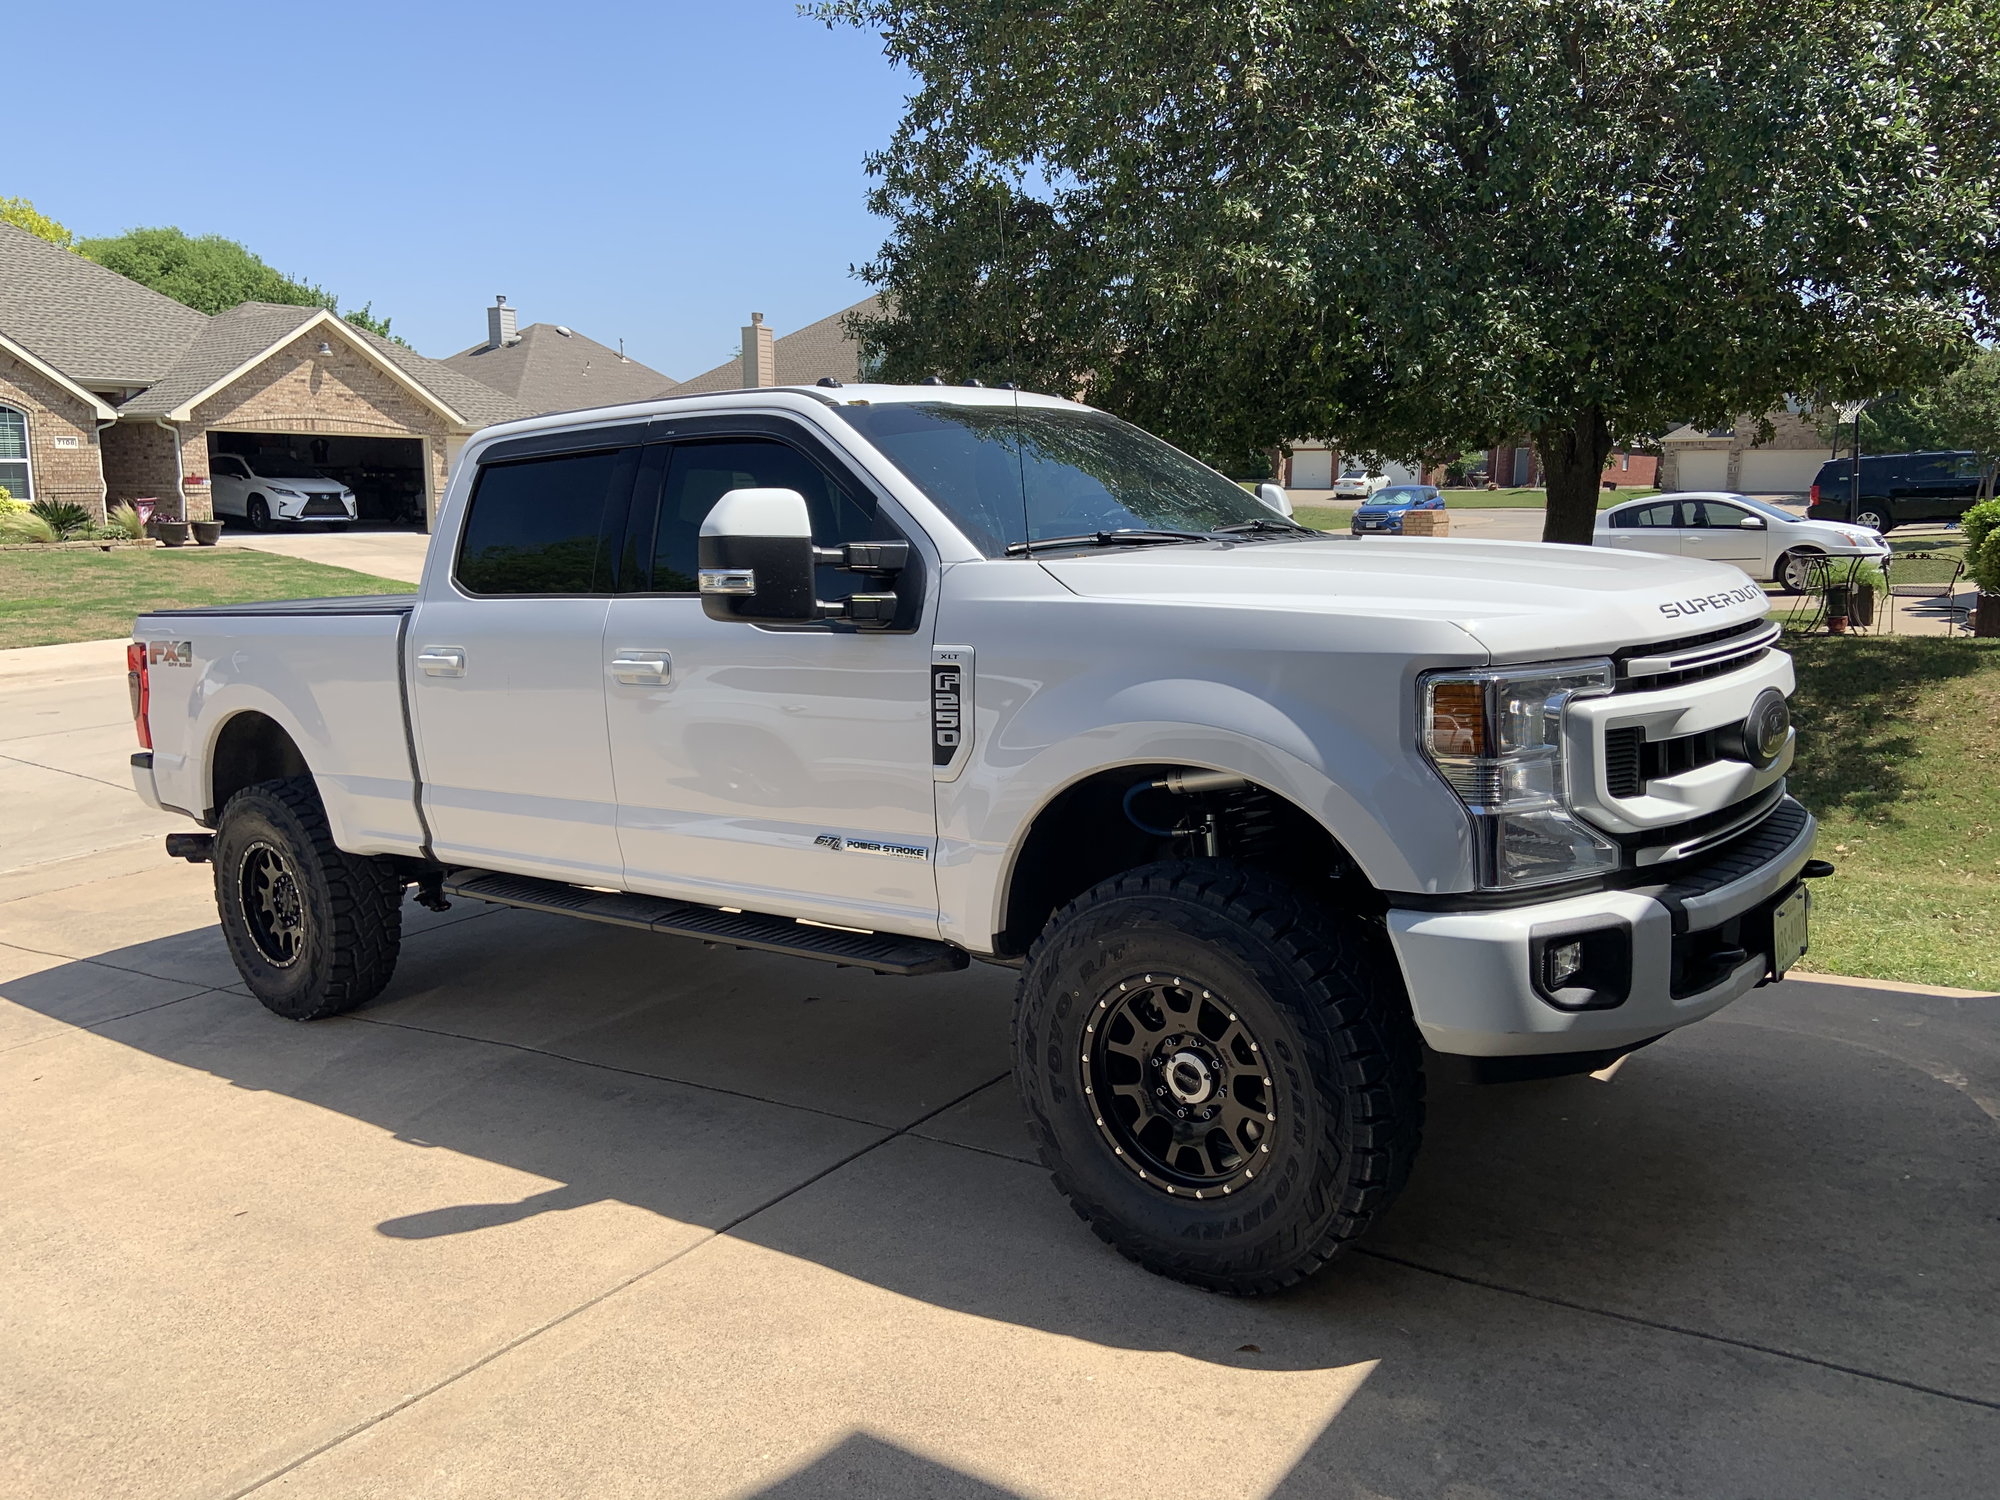 2020 F250 Tire pressure and Forscan help - Ford Truck Enthusiasts Forums F250 Tire Pressure For Smoother Ride